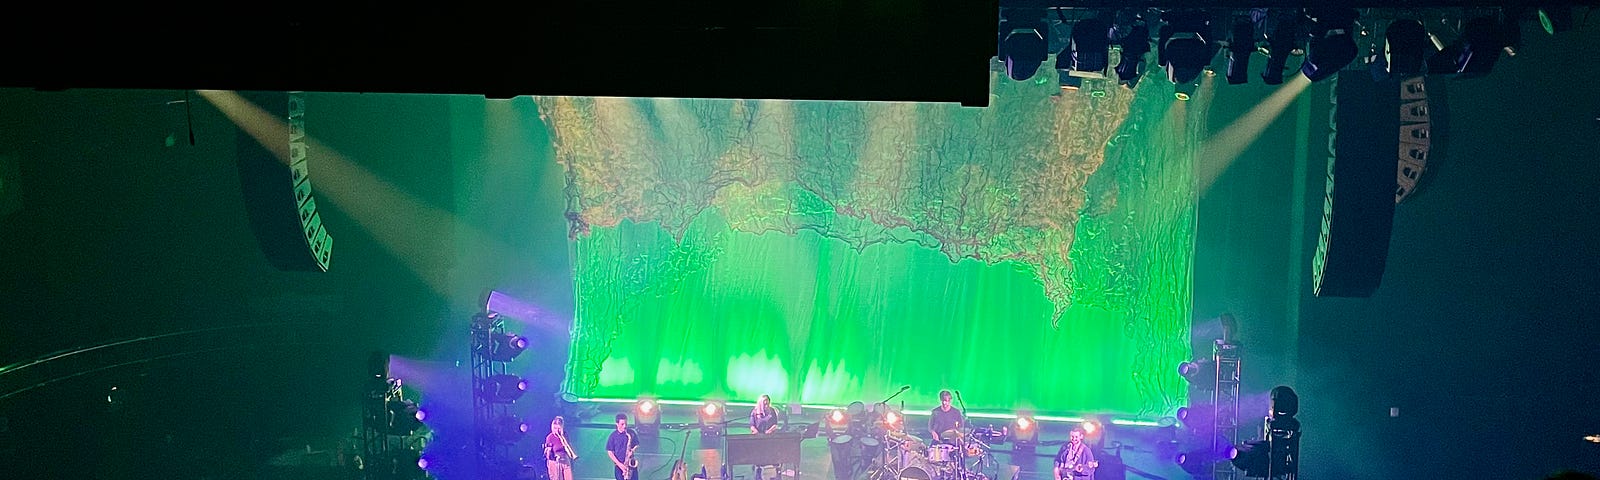 Vance Joy stands at the front of the stage, playing guitar. The band is behind him a saxephone player, a trumpet player, a keyboardist, a drummer and a guitarist. The stage is lit up green and blue.